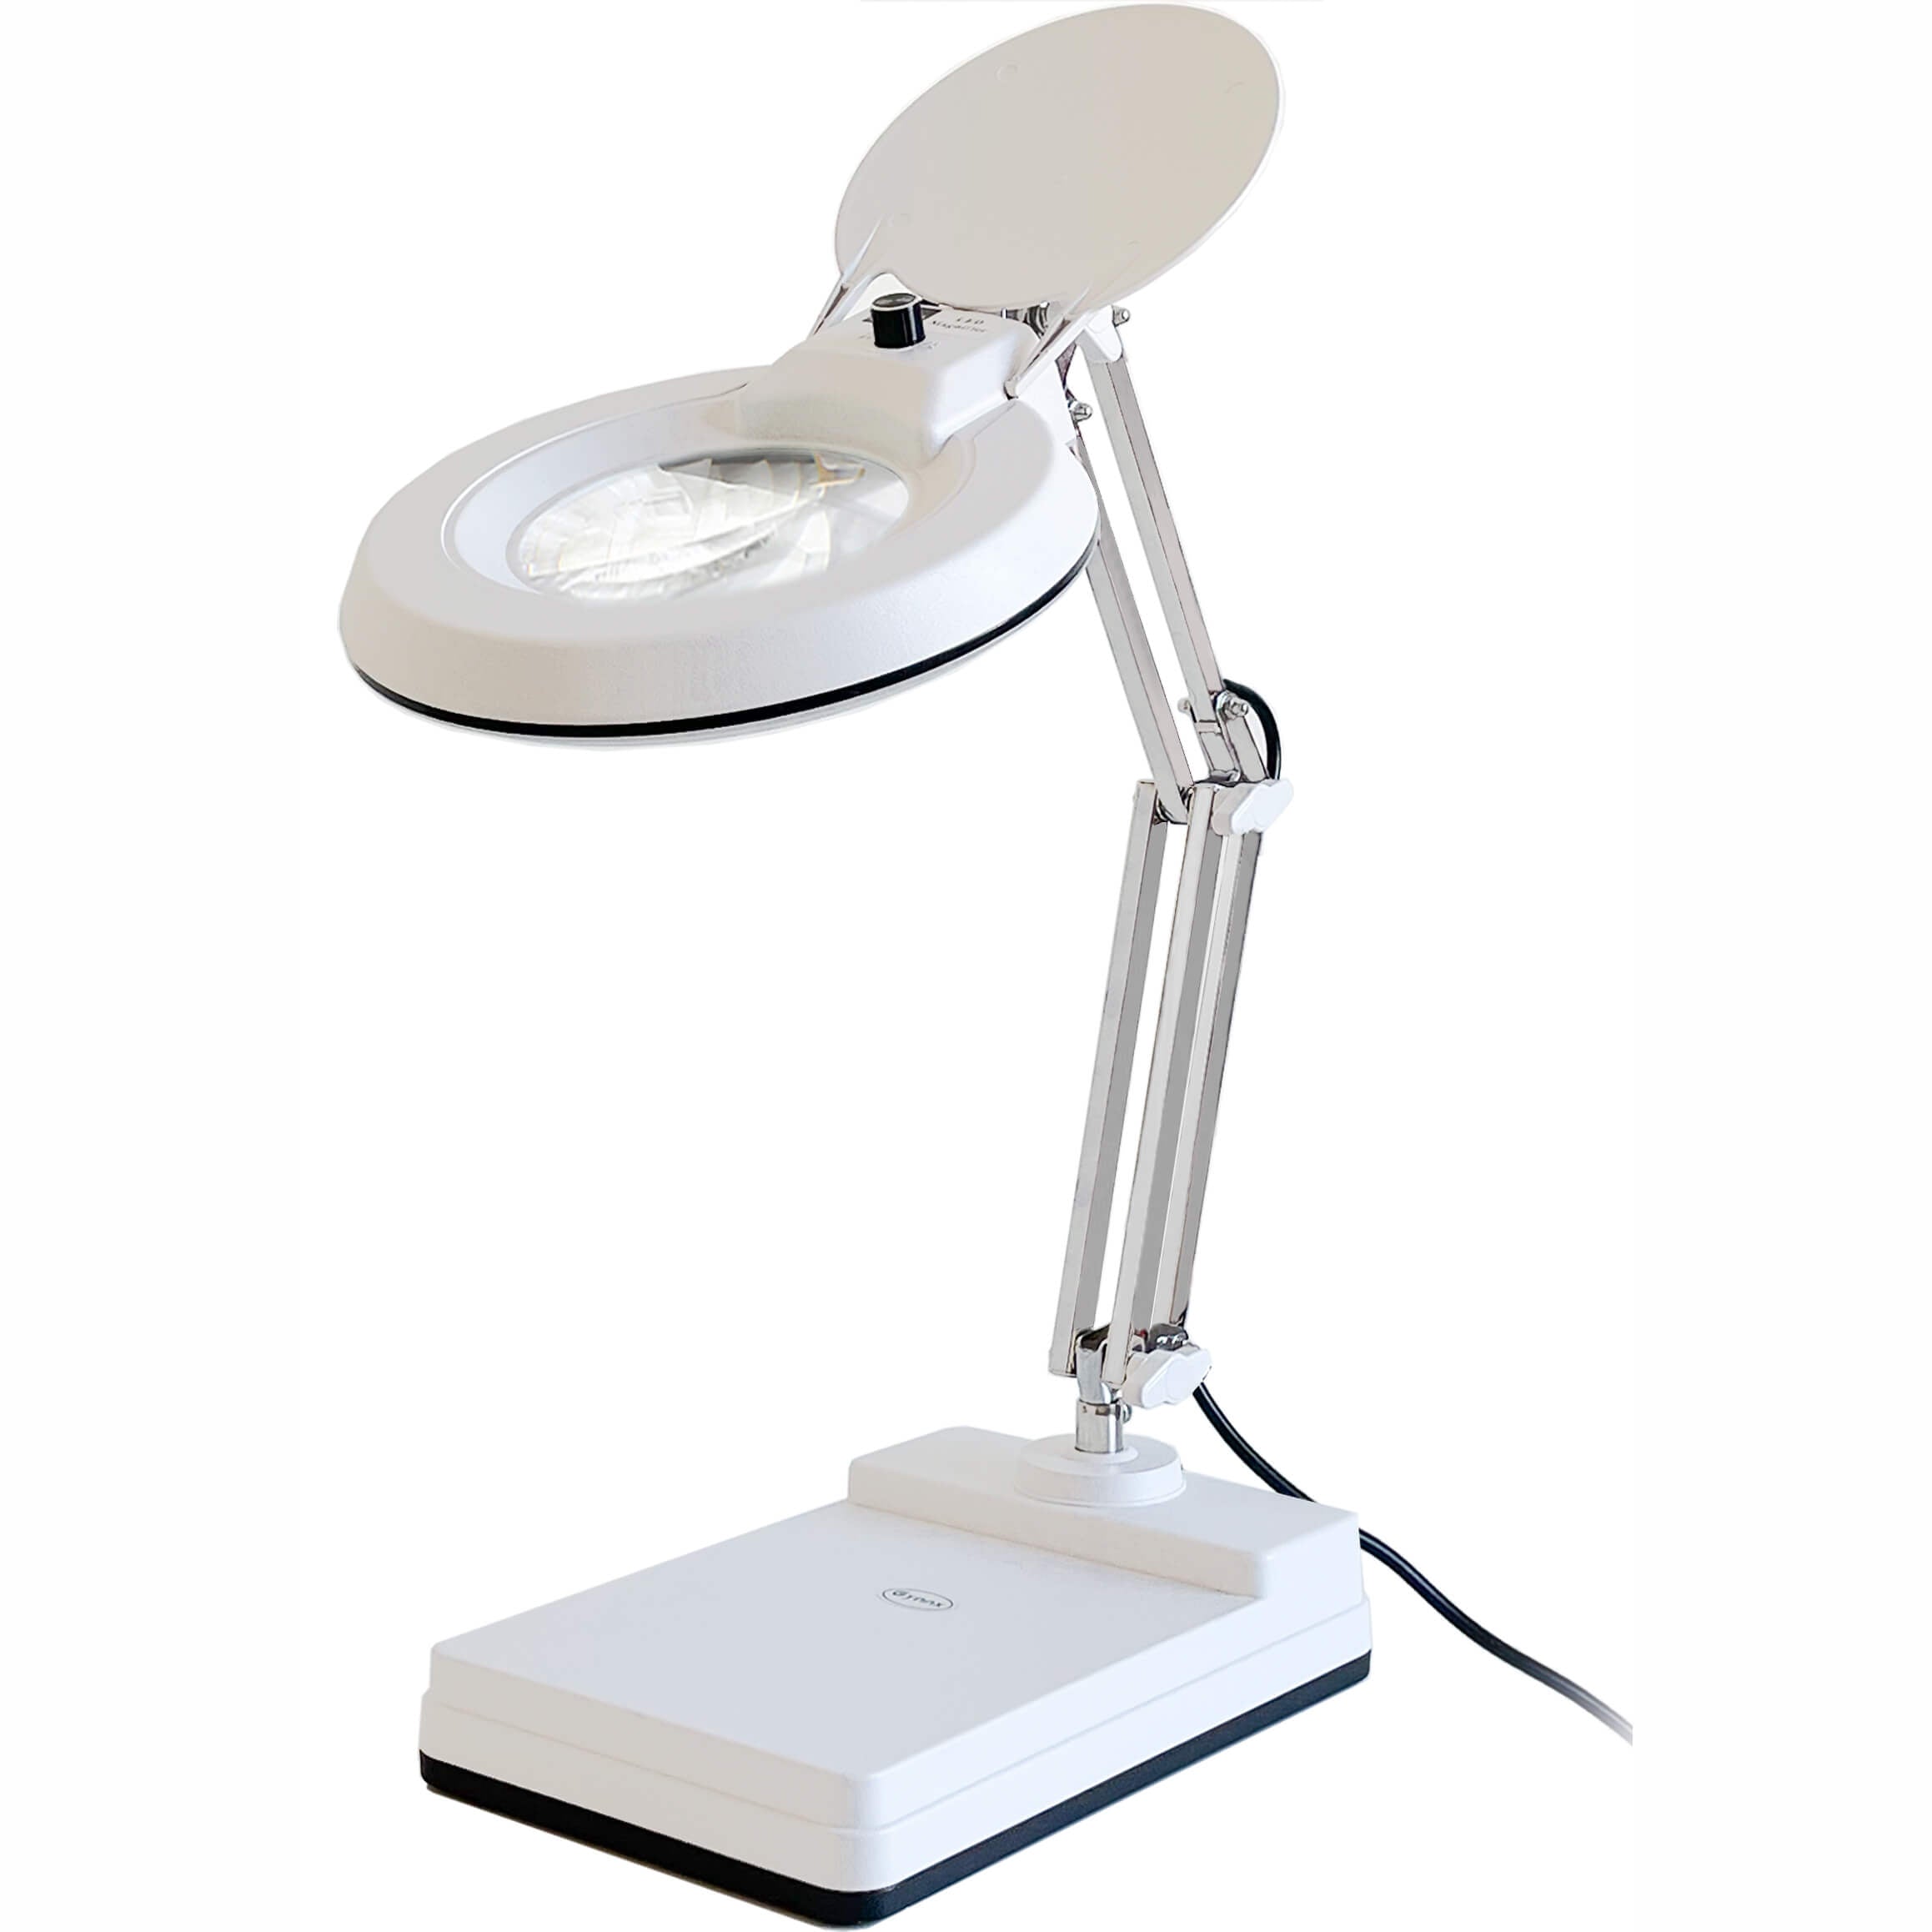 Dimmable LED Magnifying Lamp 10X N2 - White